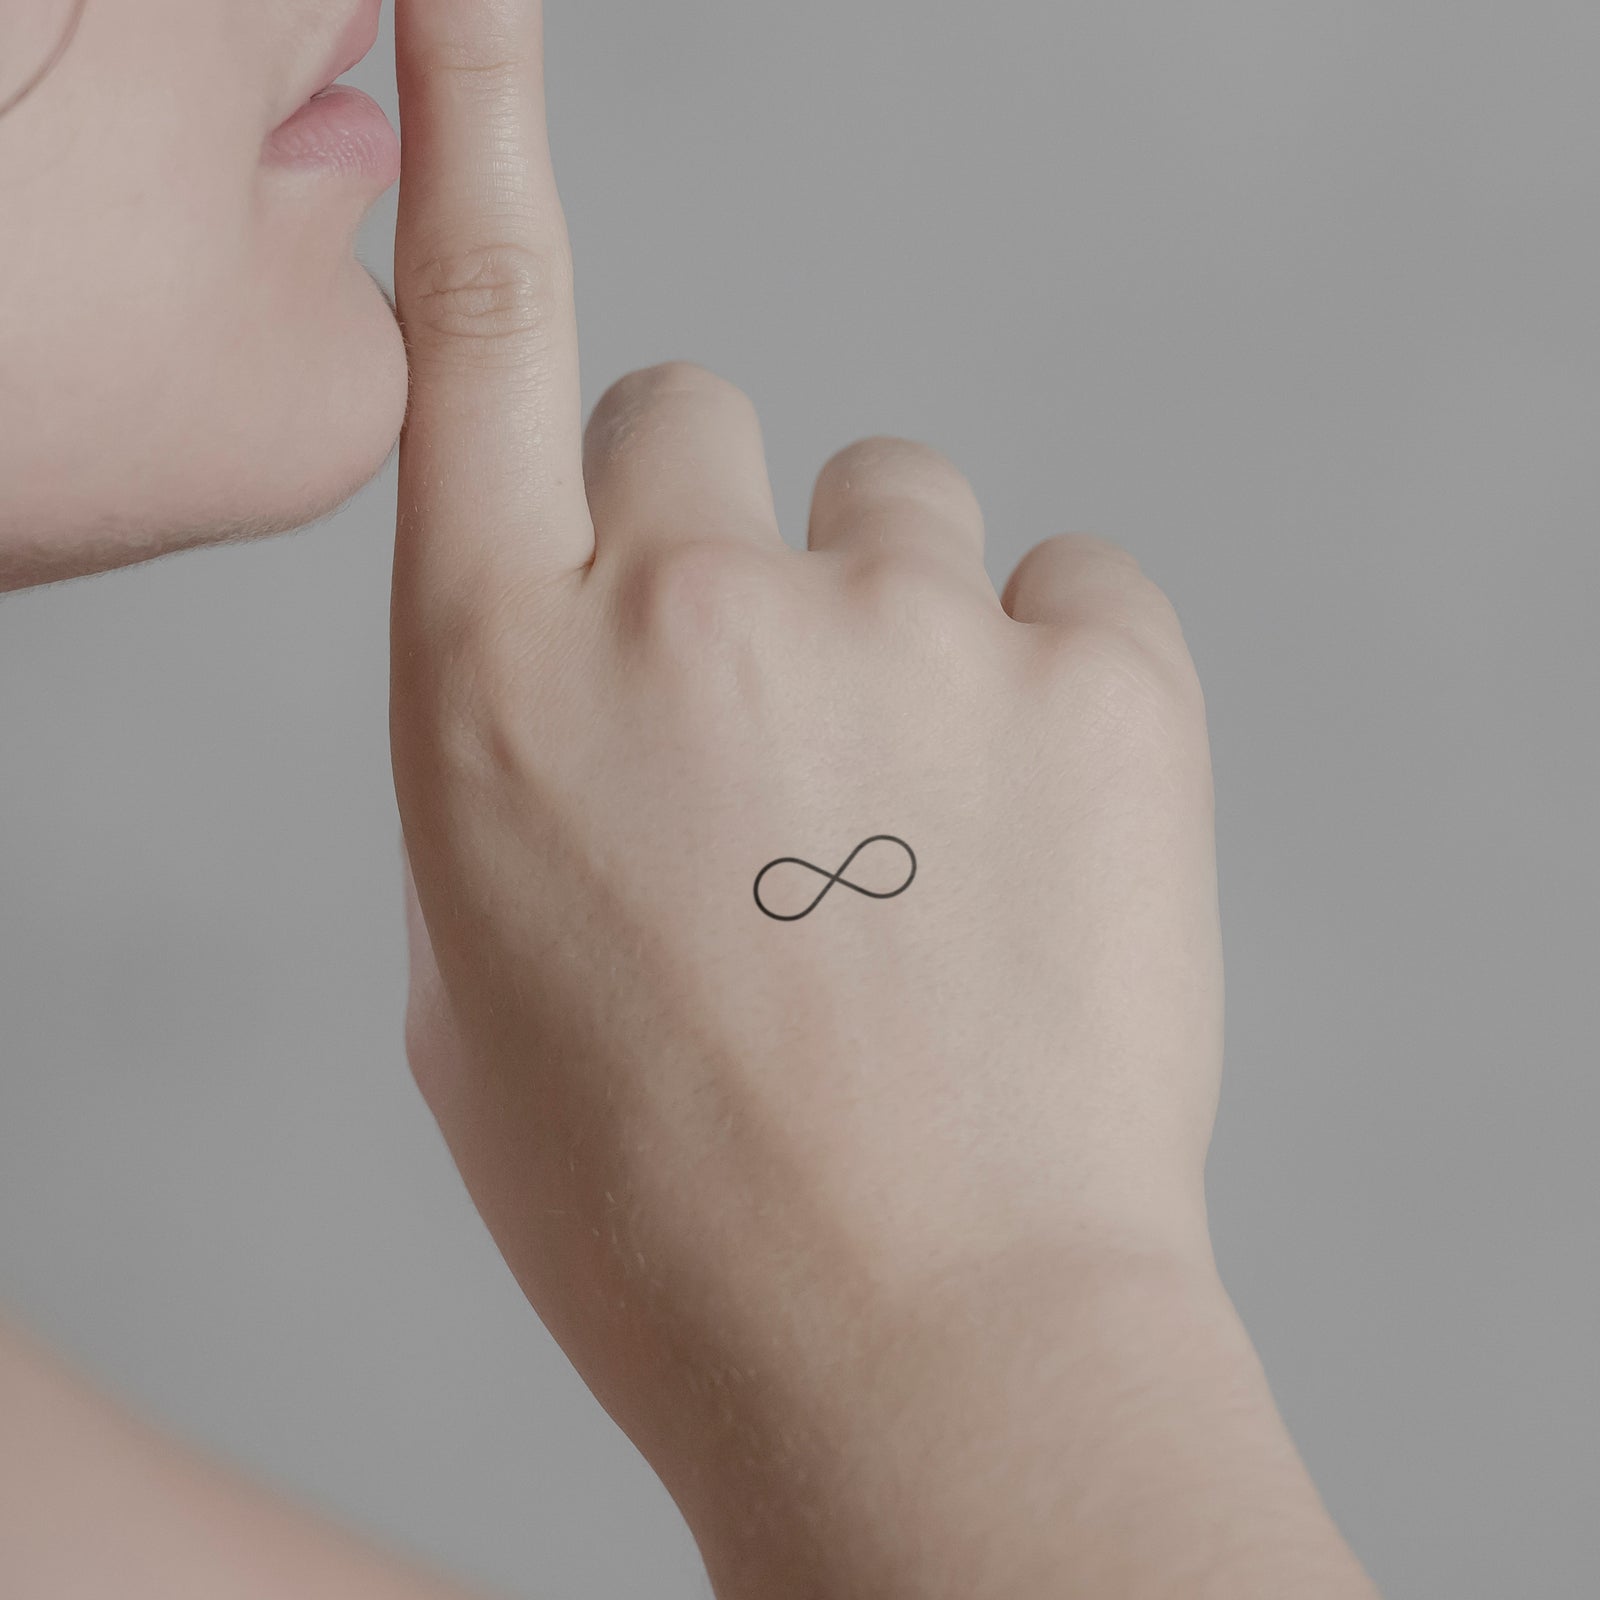 Buy Infinity Love Temporary Tattoo set of 3 Online in India - Etsy